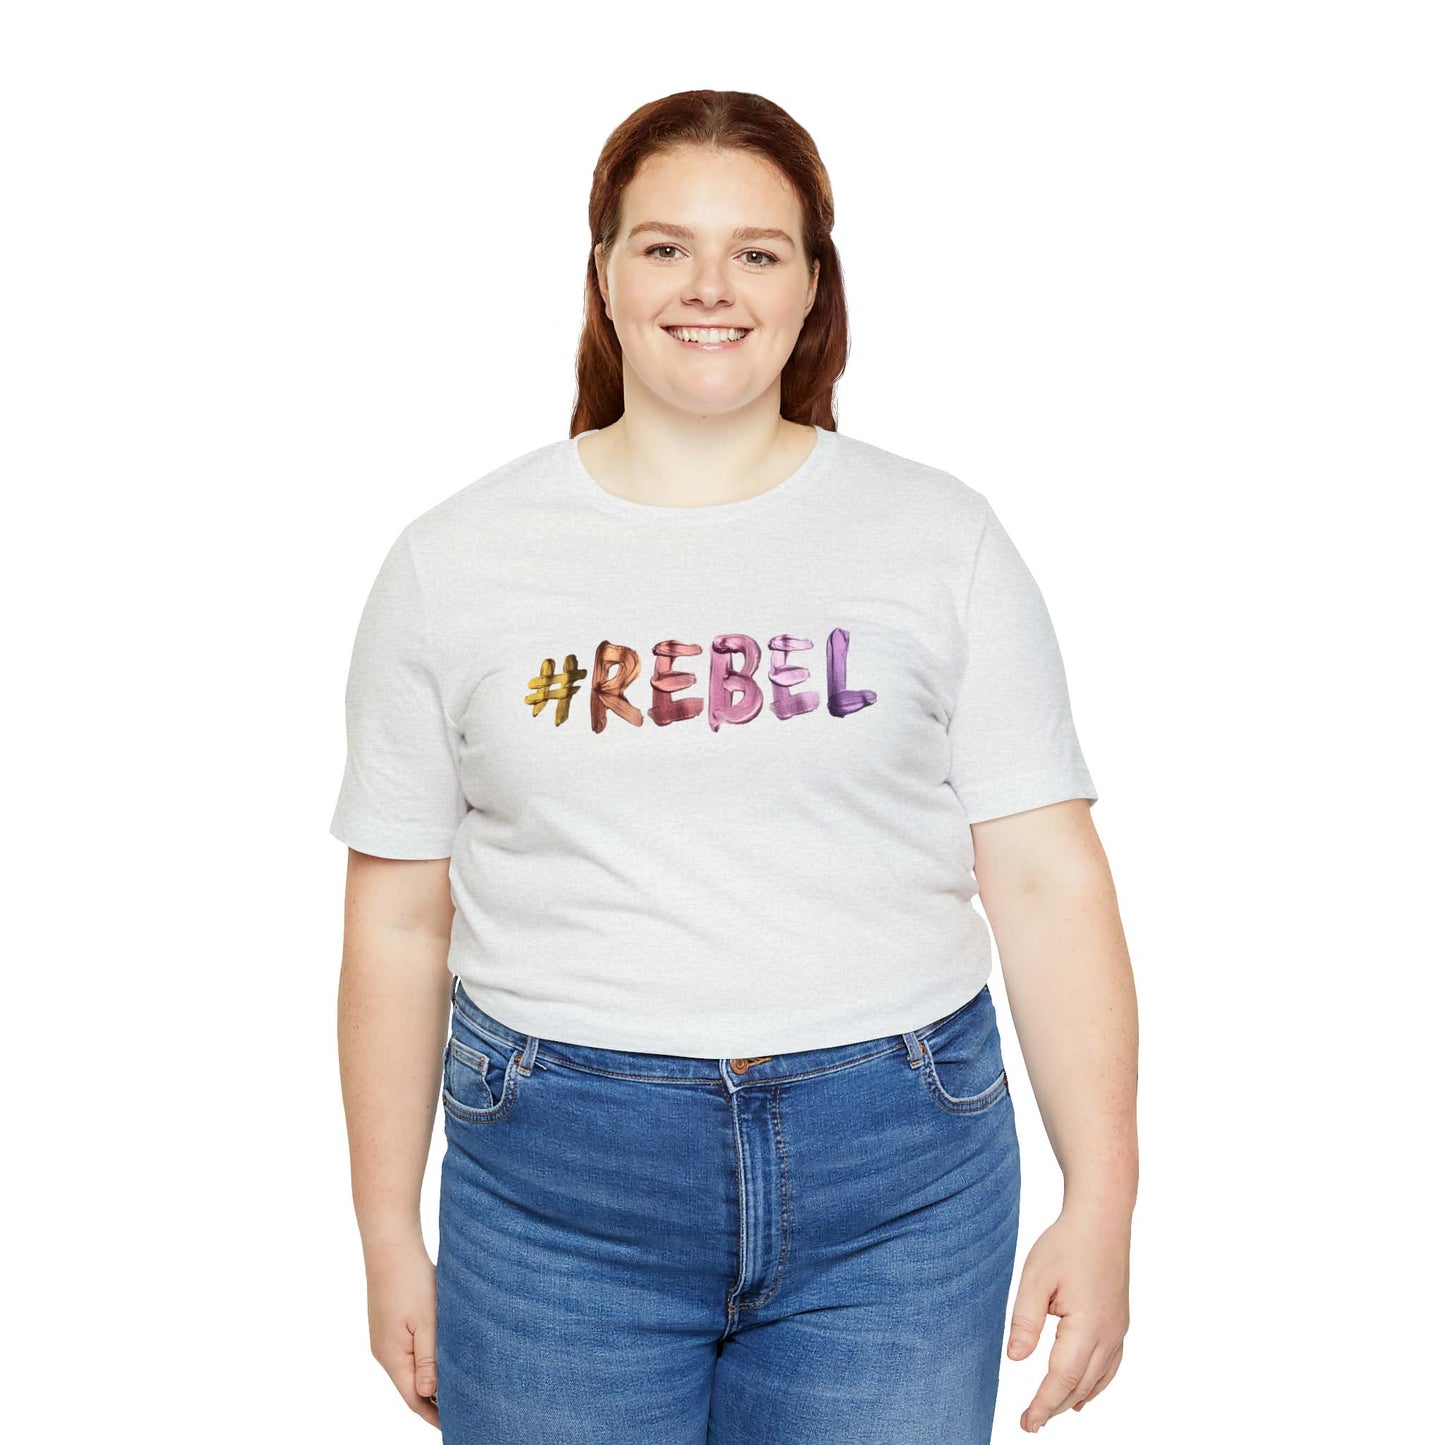 Introducing our #REBEL shirt for women! This ash shirt has our #REBEL meme printed at tje front of the short sleeve shirt.